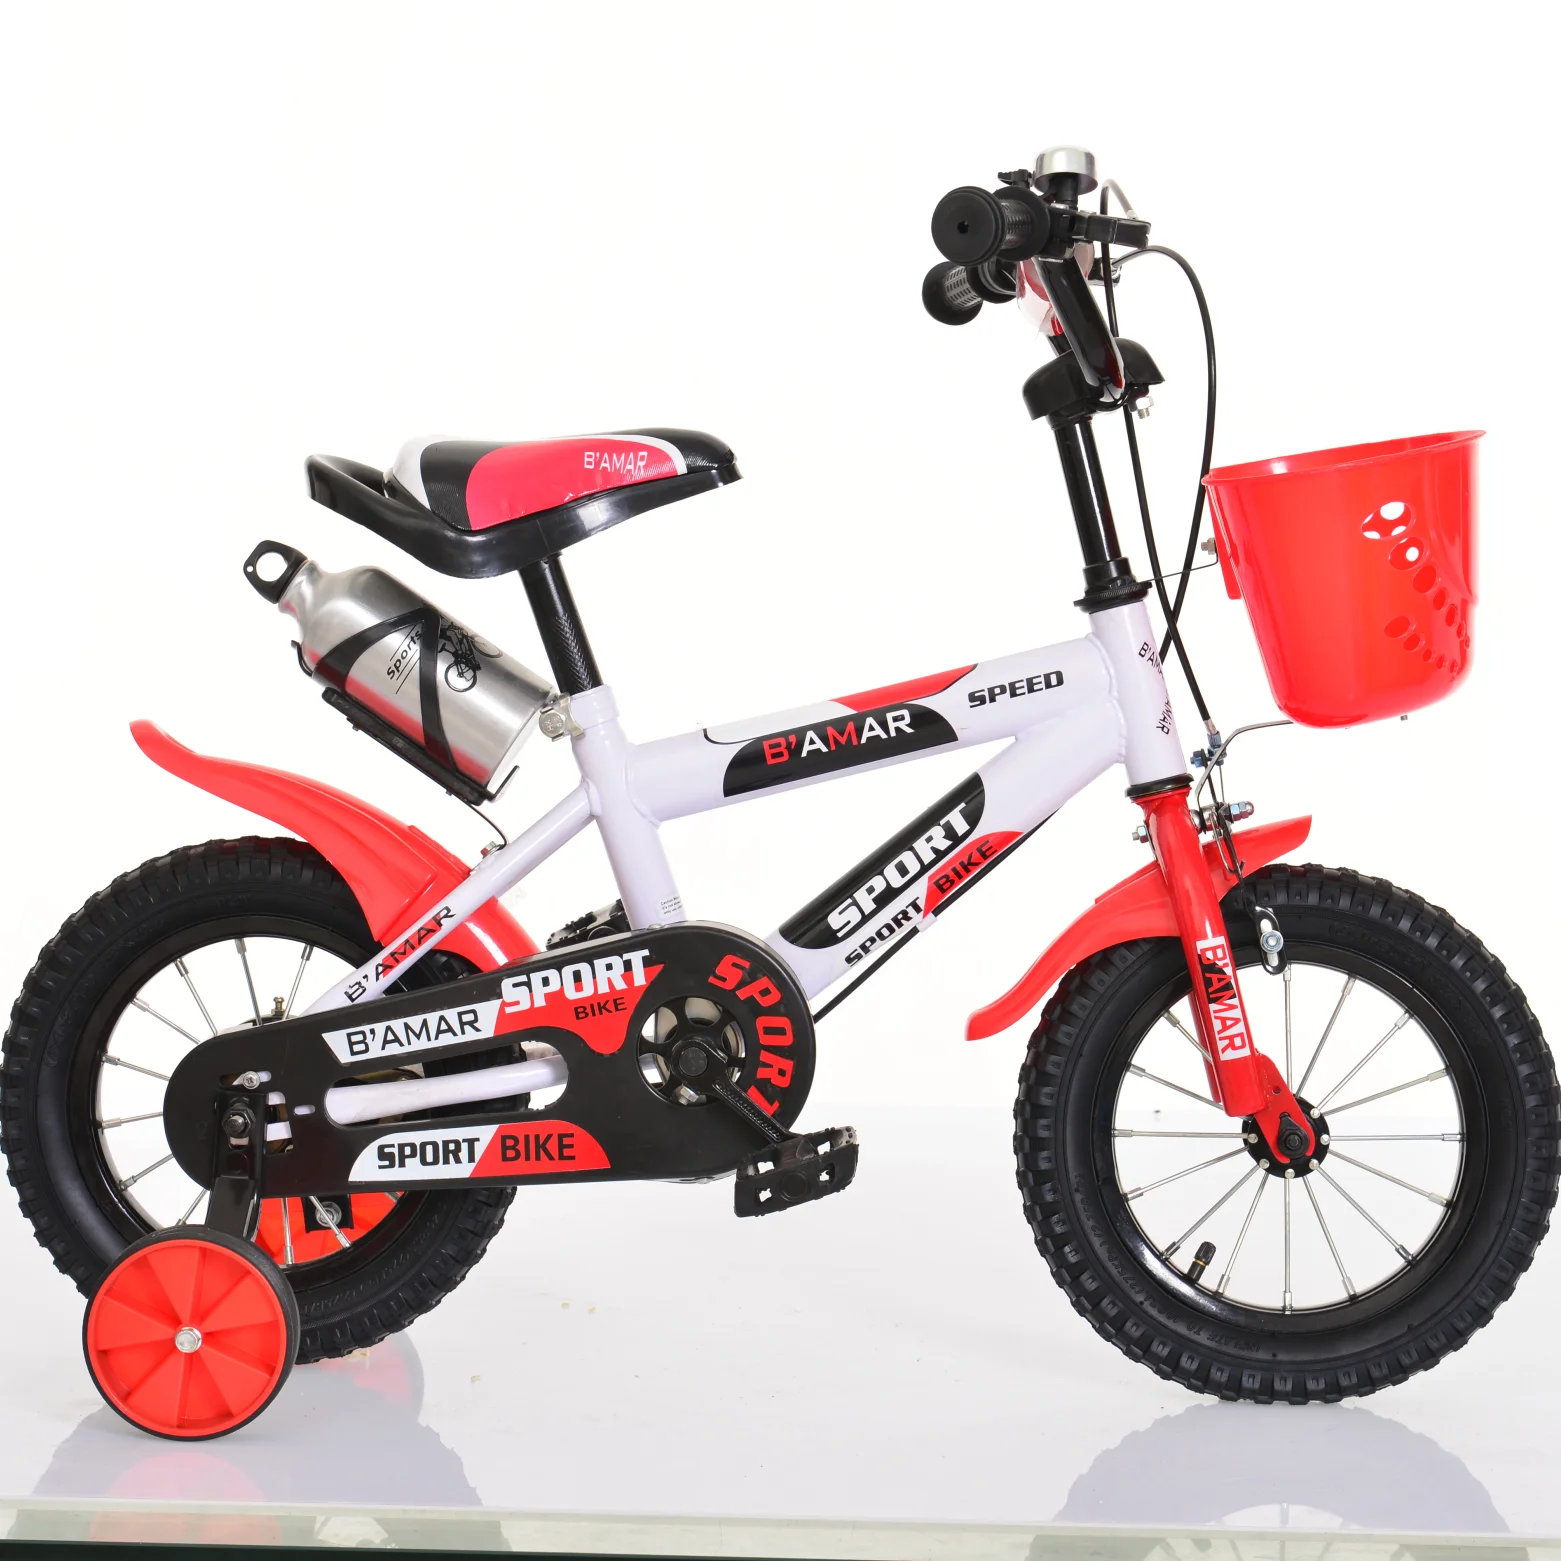 

Wholesale steel kids bikes/CE approved new model 12 inch cycle for kid/OEM cheap 4 wheel children bike for 3 to 5 years old baby, Red green yellow blue black